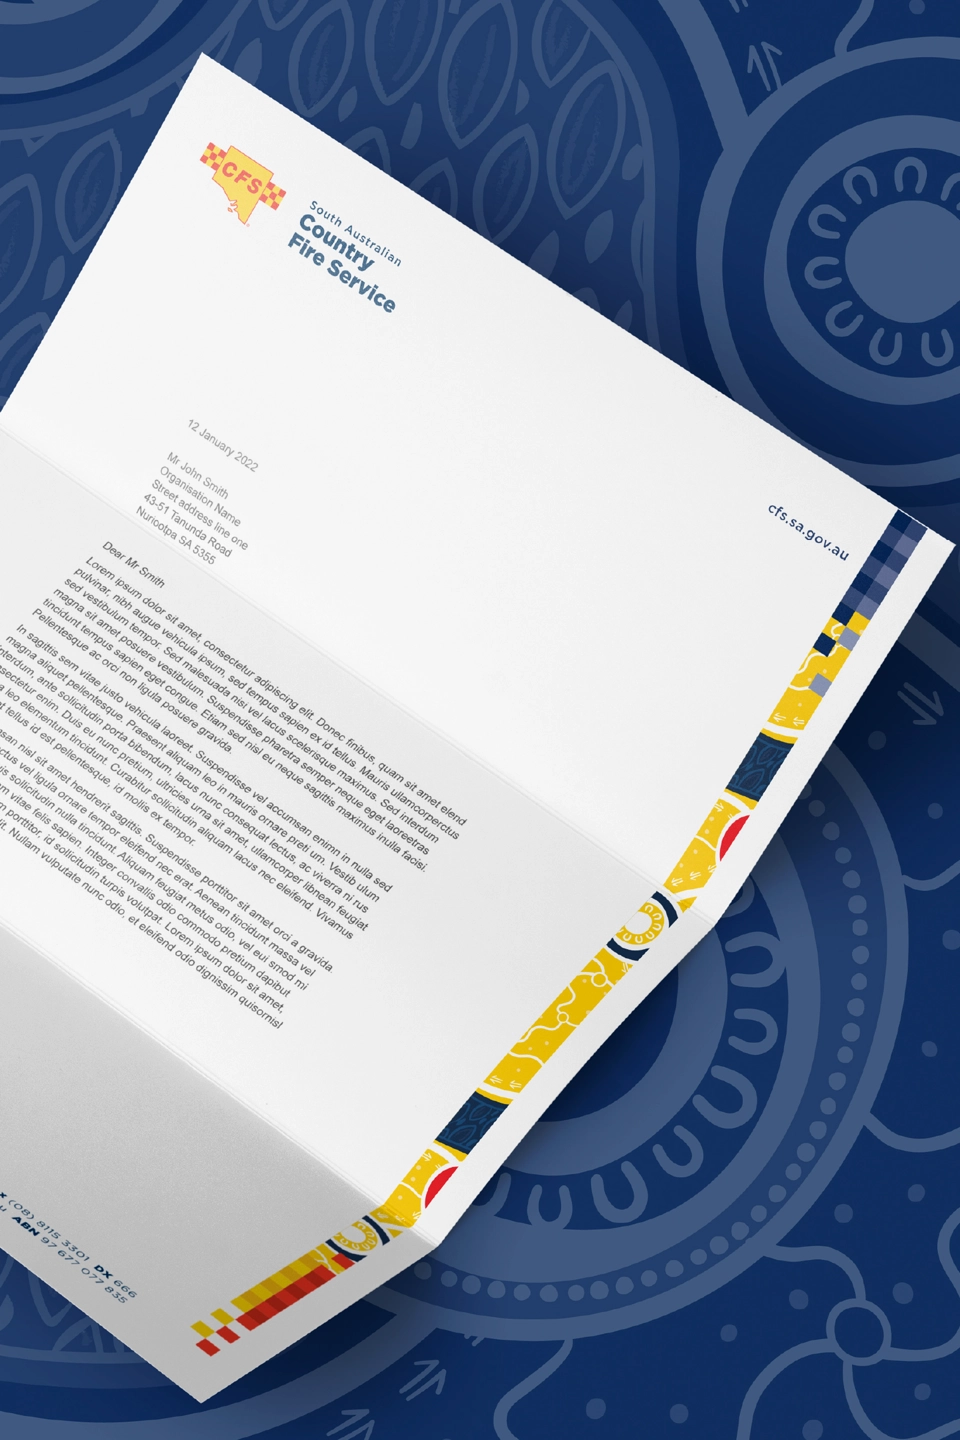 South Australian Country Fire Service (SACFS) - reconciliation letter design